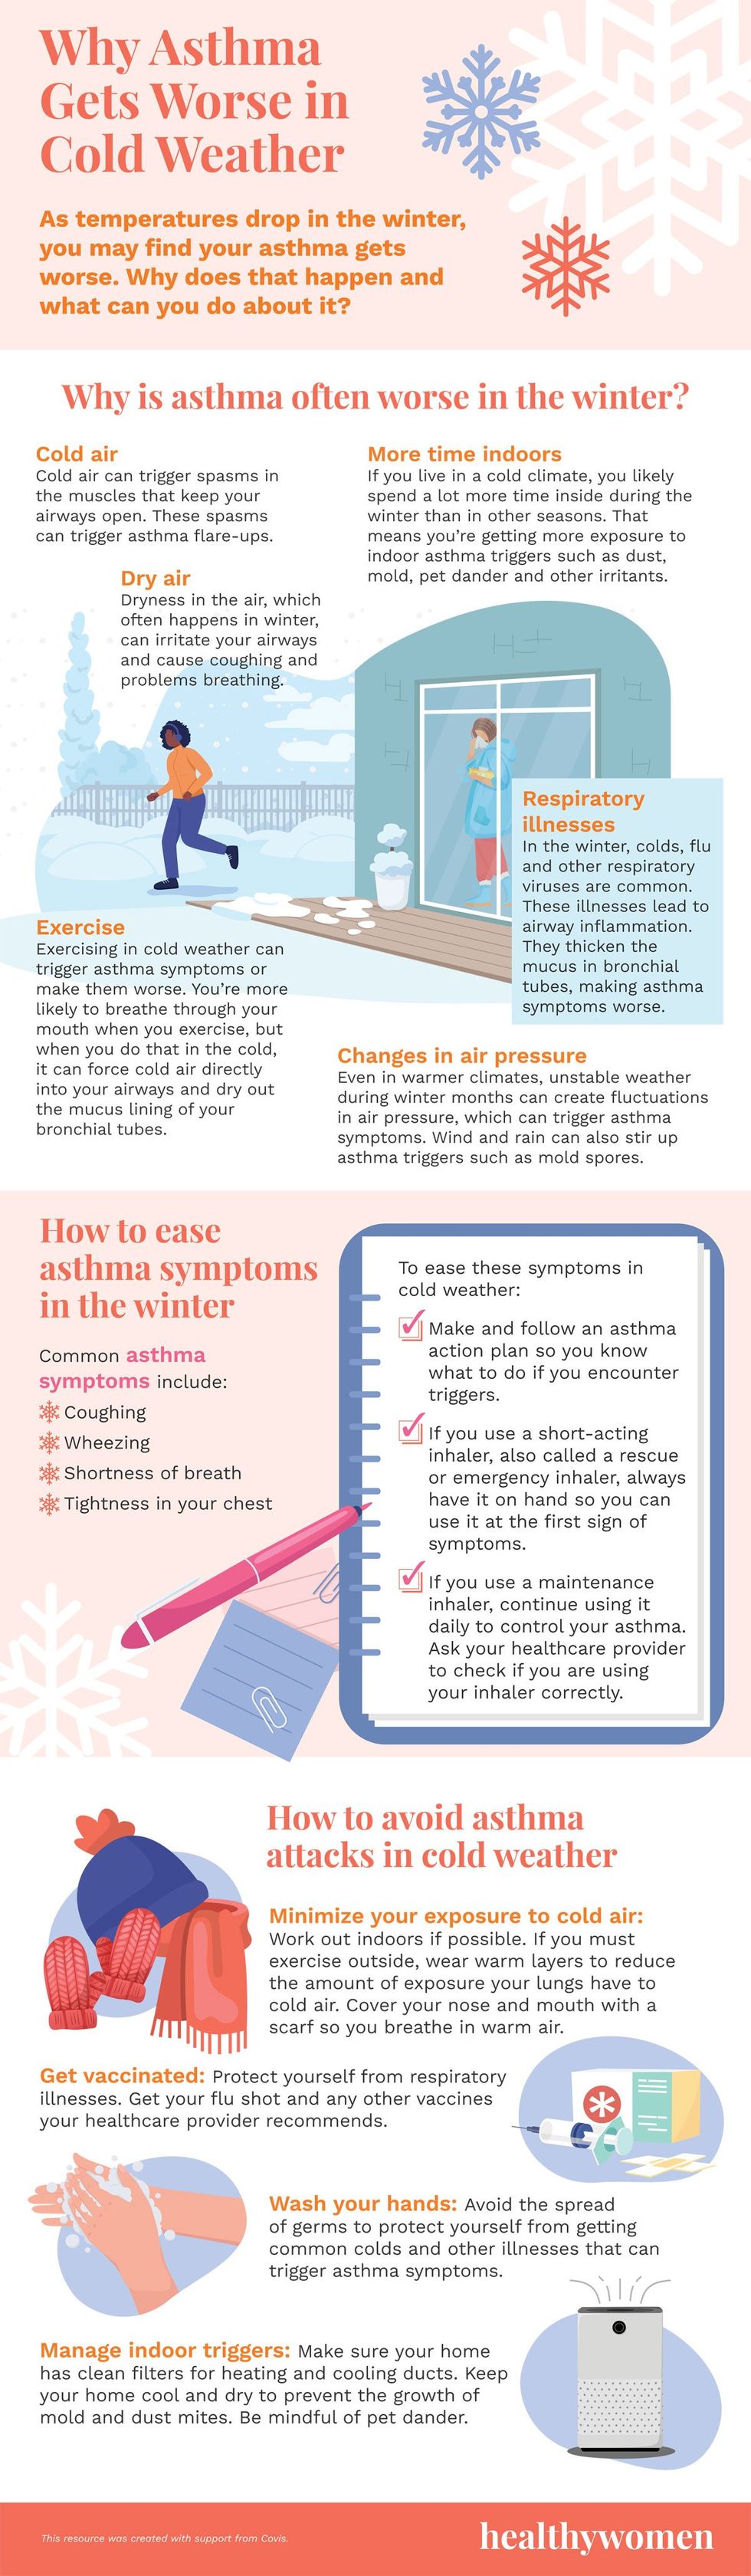 Infographic Why Asthma Gets Worse in Cold Weather. Click the image to open the PDF